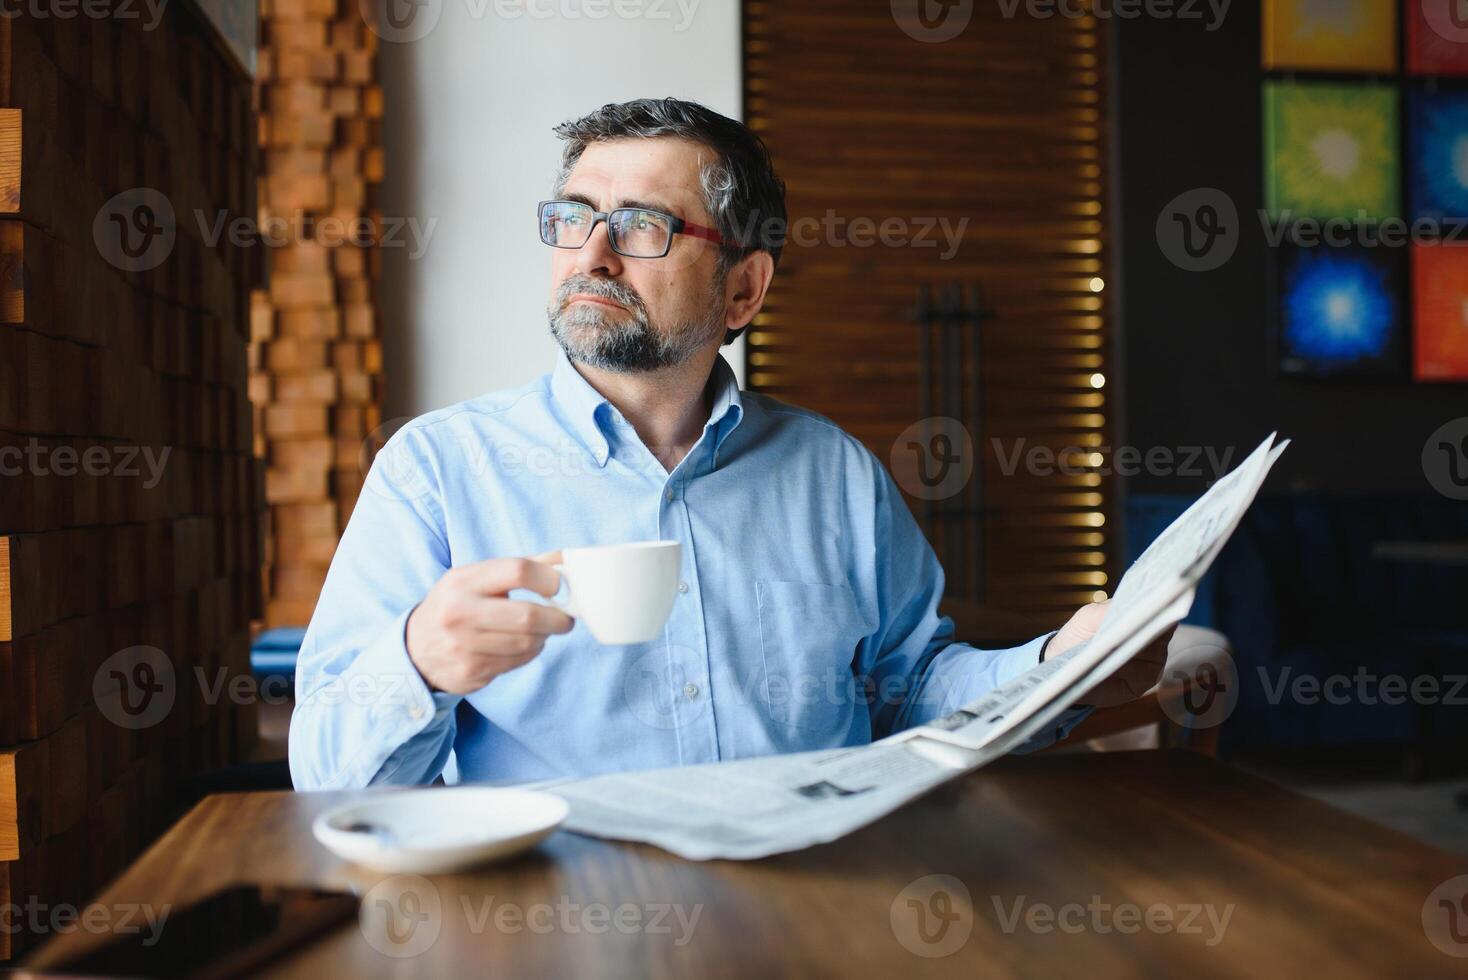 coffee break. man drinking coffee and reading newspaper in cafe bar photo